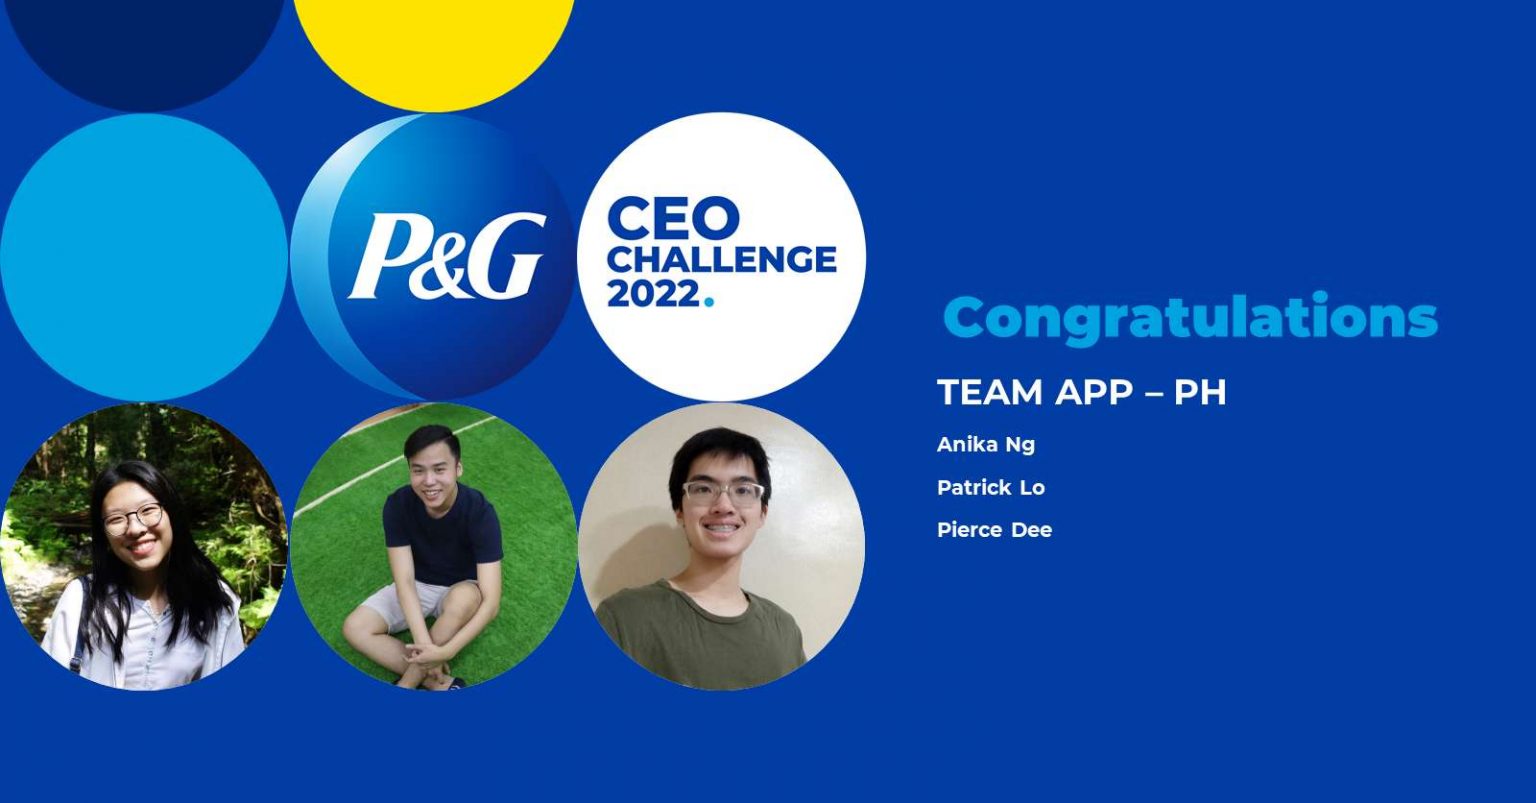 procter-and-gamble-philippines-hosts-its-annual-p-g-ceo-challenge-for-undergrad-students-to-test